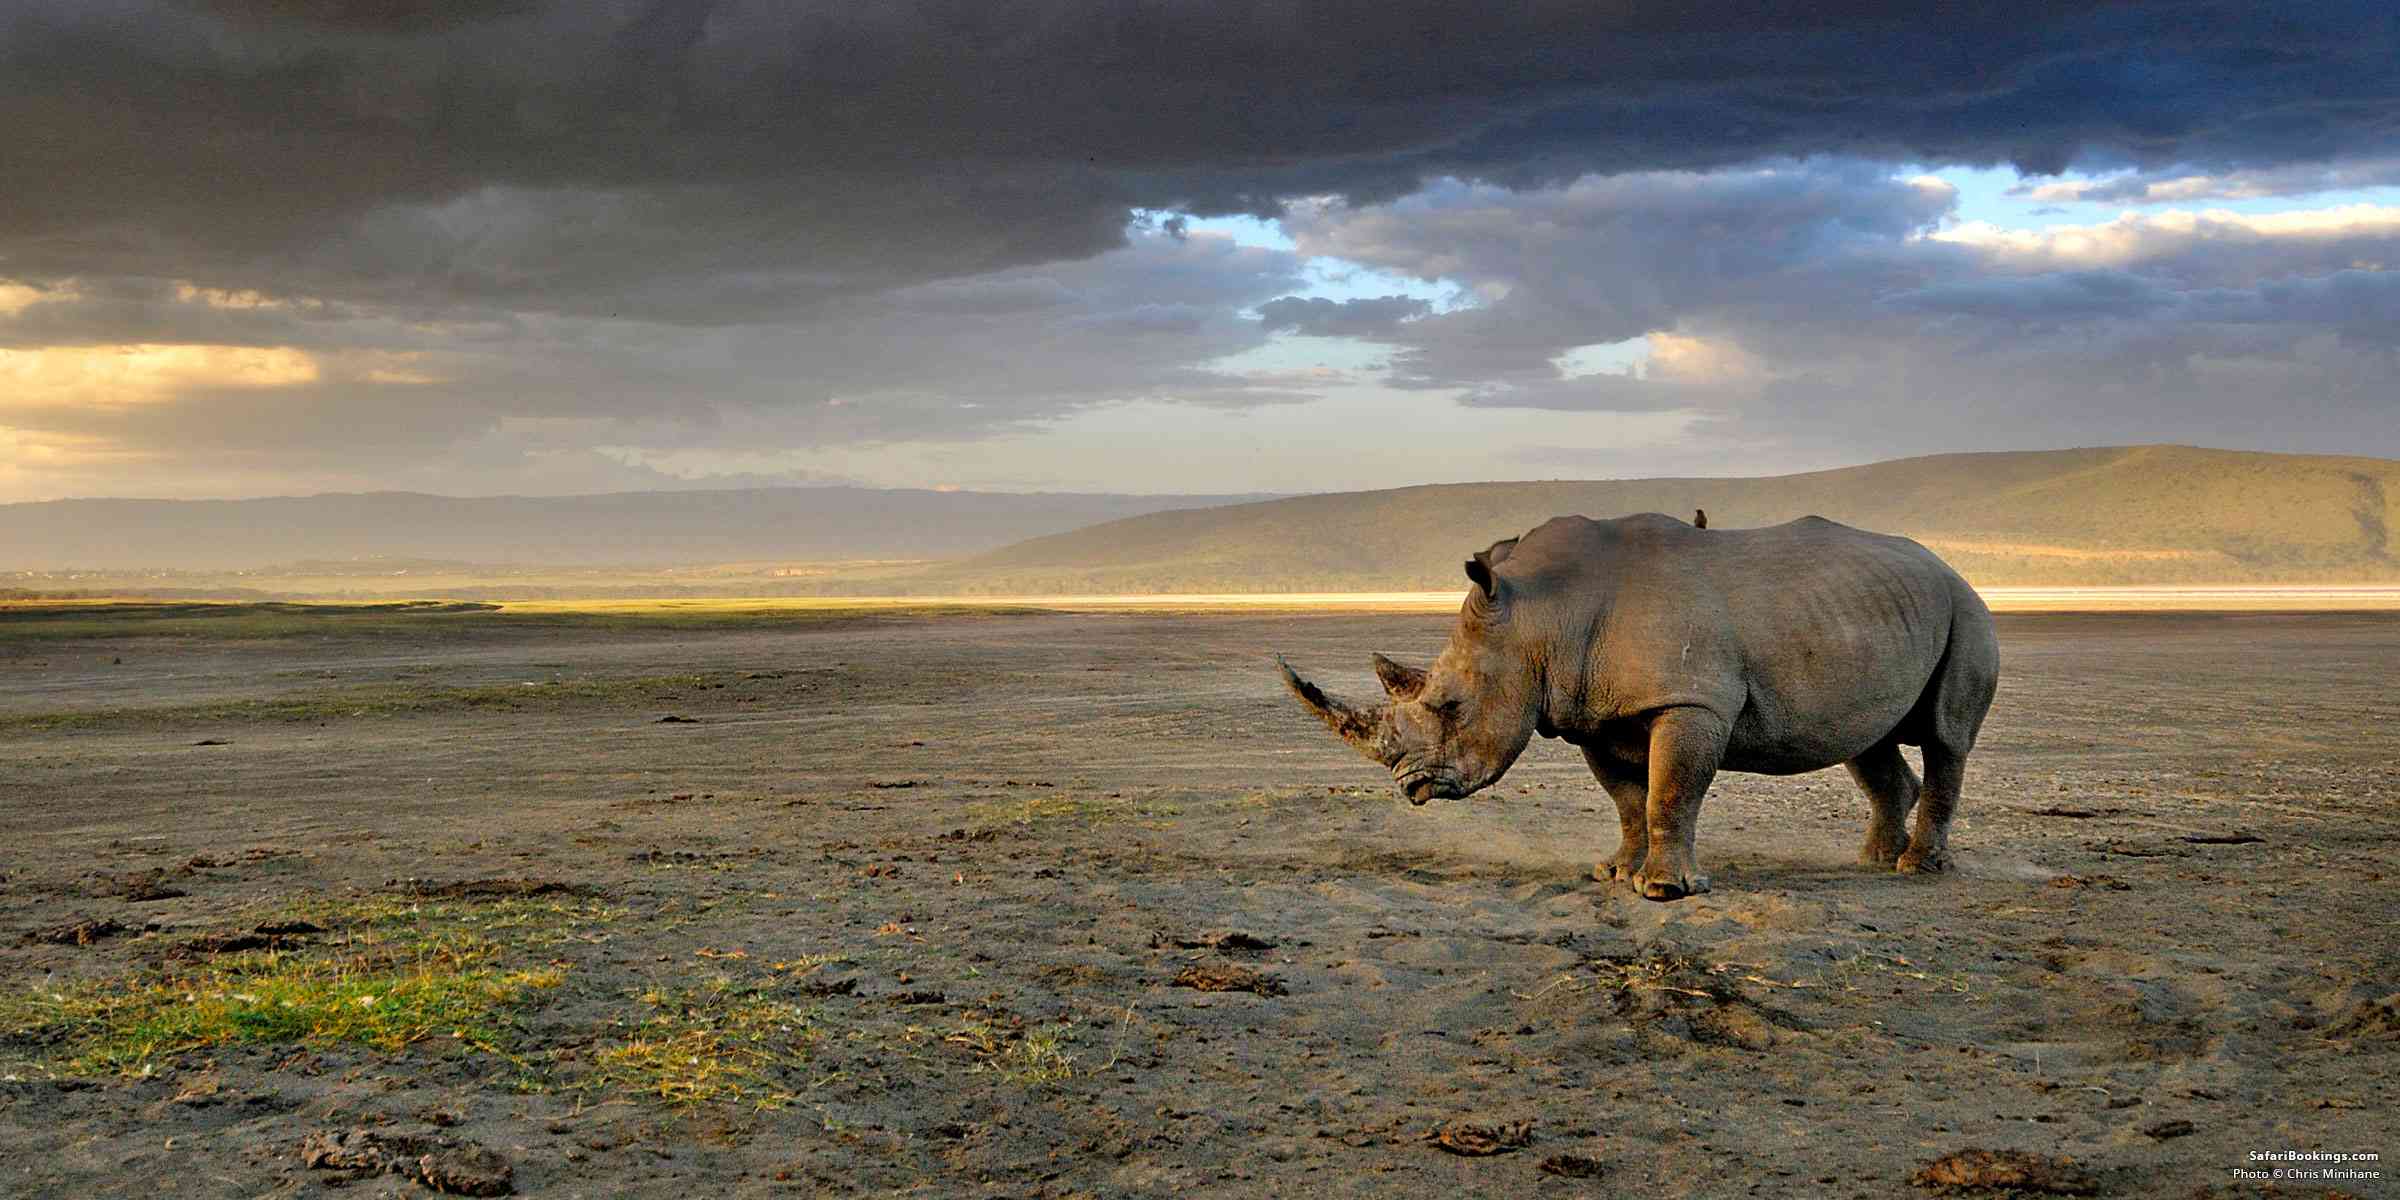 5 Fascinating Facts About the Black Rhino